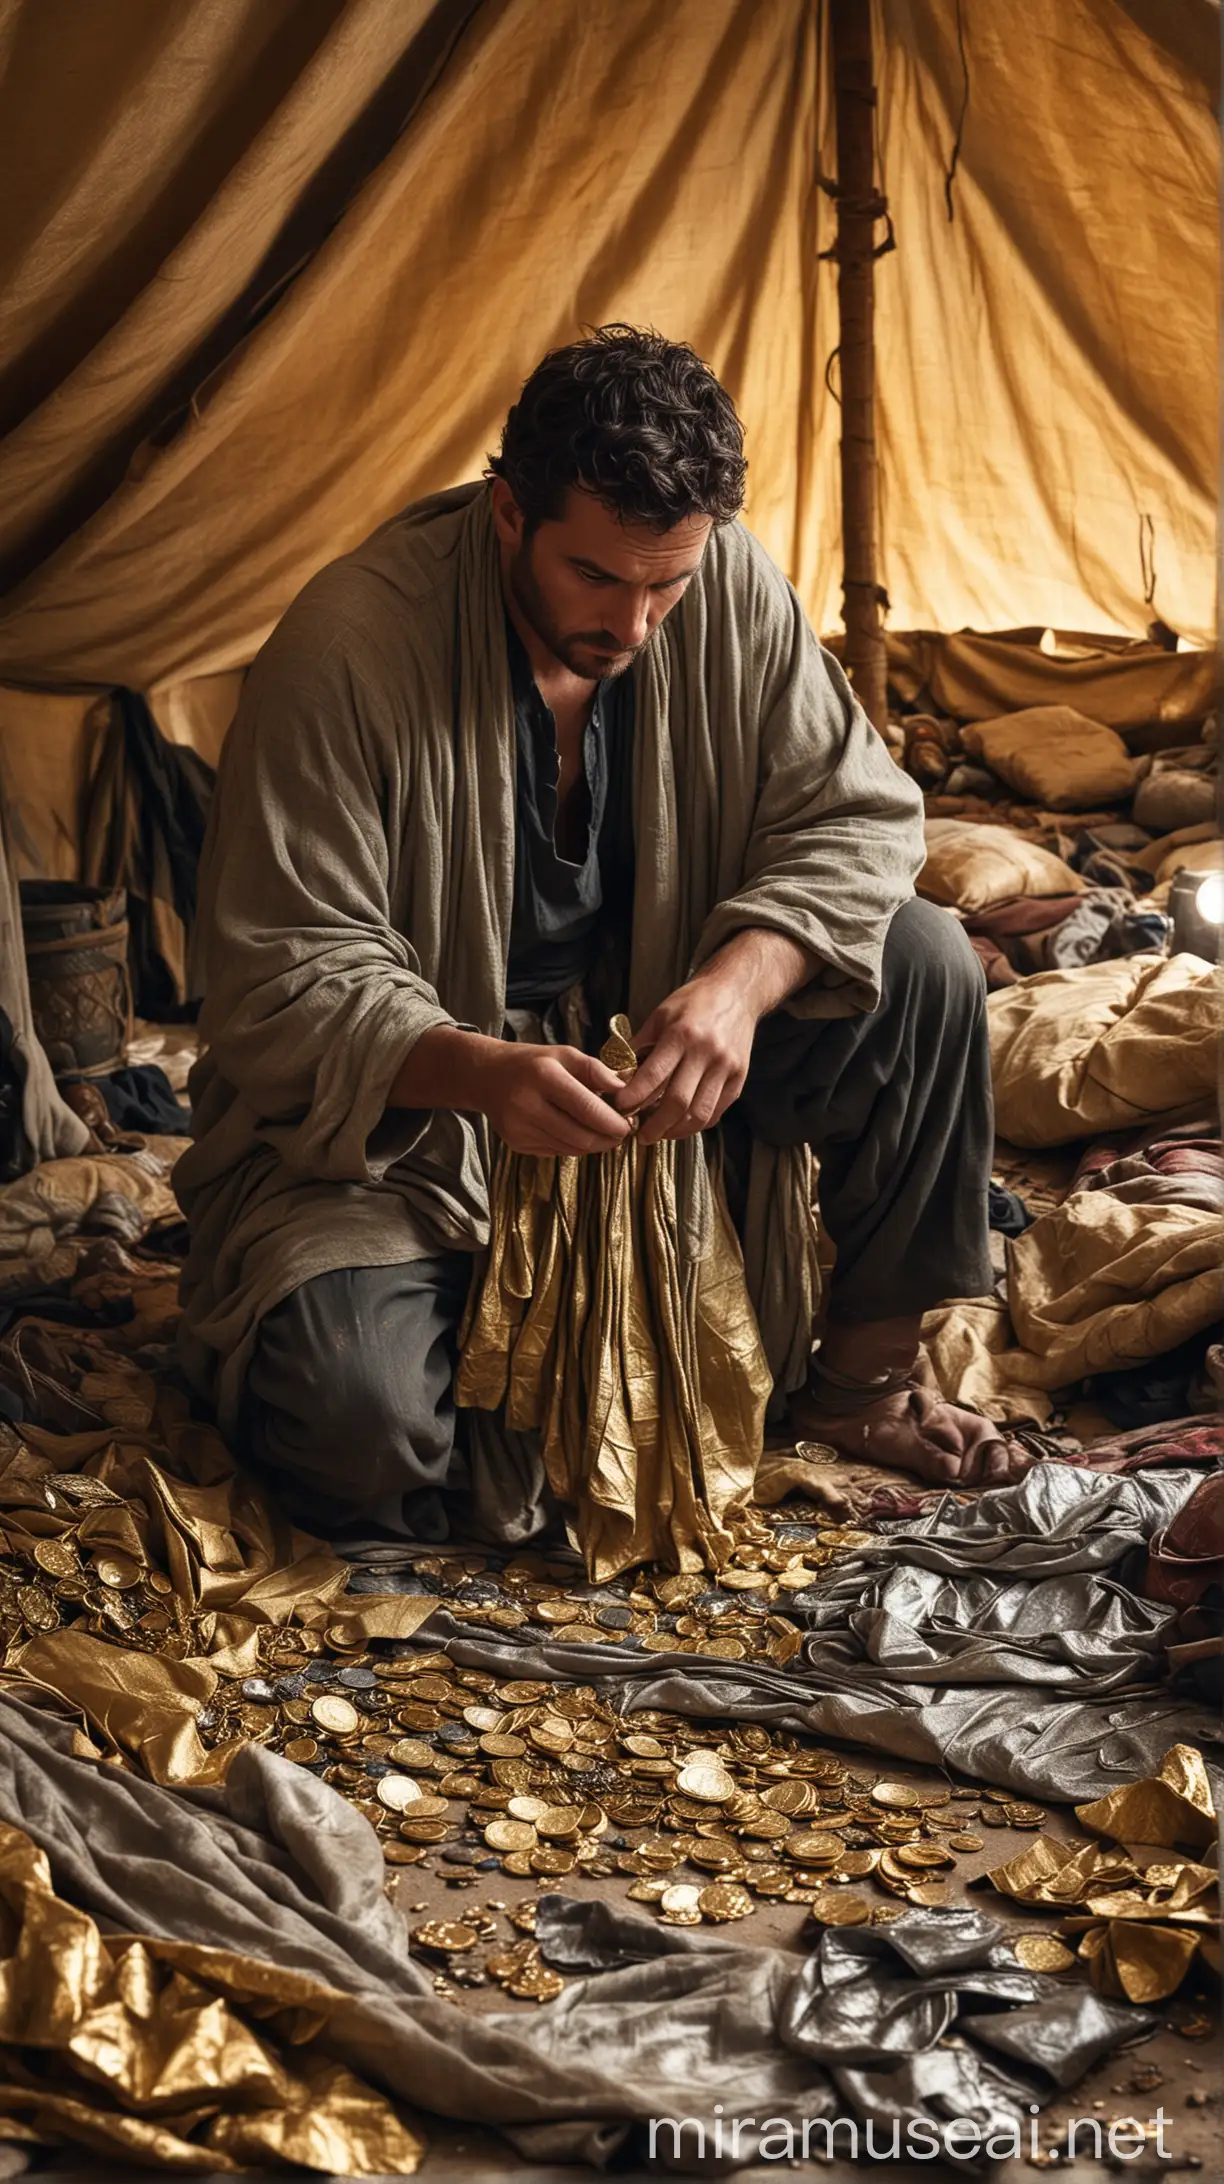 Generate an image of a man stealthily taking a garment, gold, and silver from a pile of spoils in an ancient tent setting.”In ancient world 